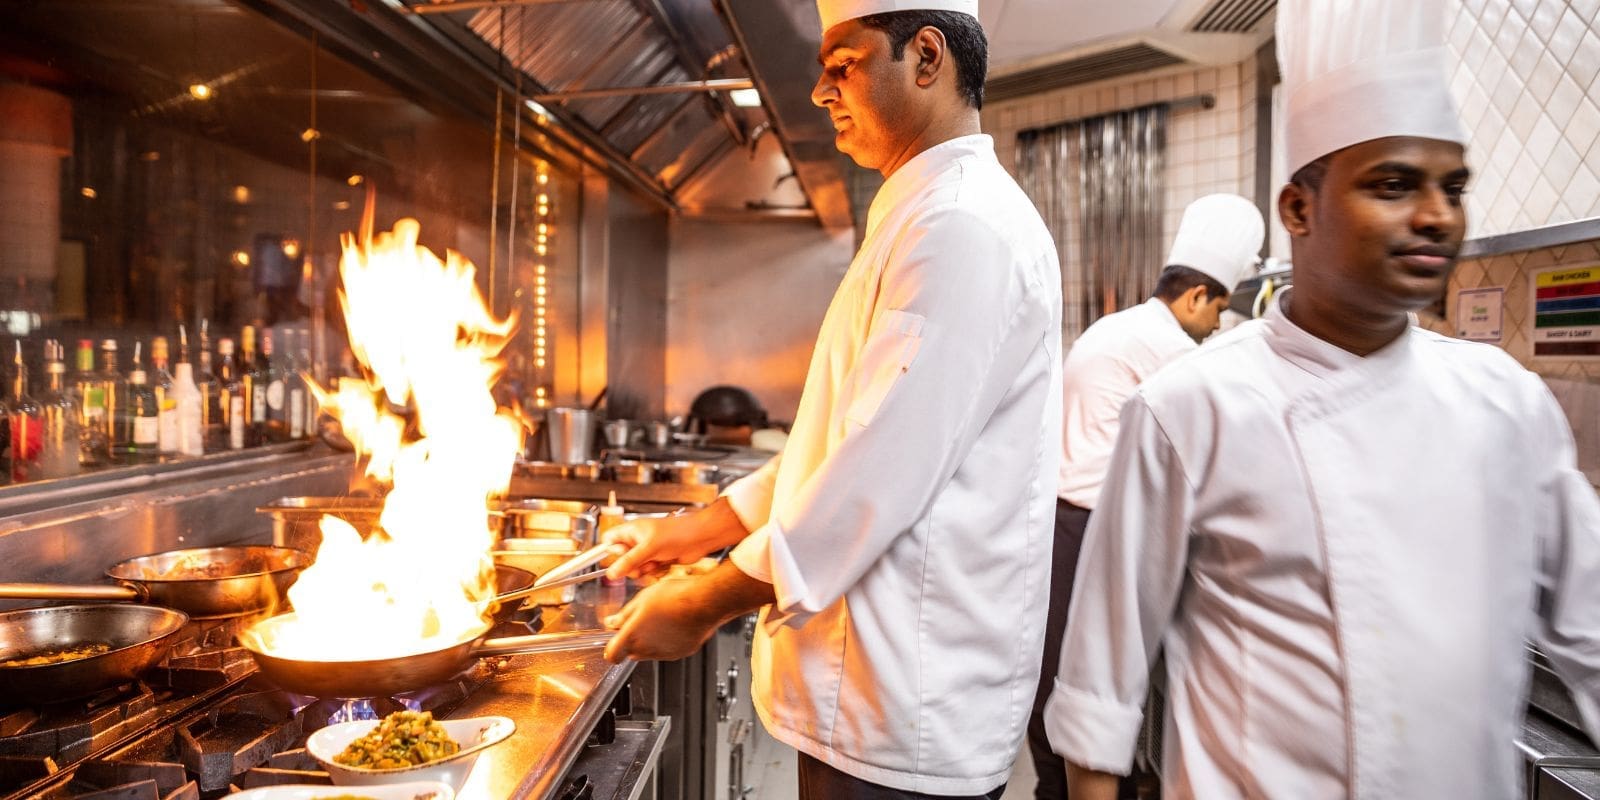 Chef cooking with a frying pan with a large flame in a restaurant setting